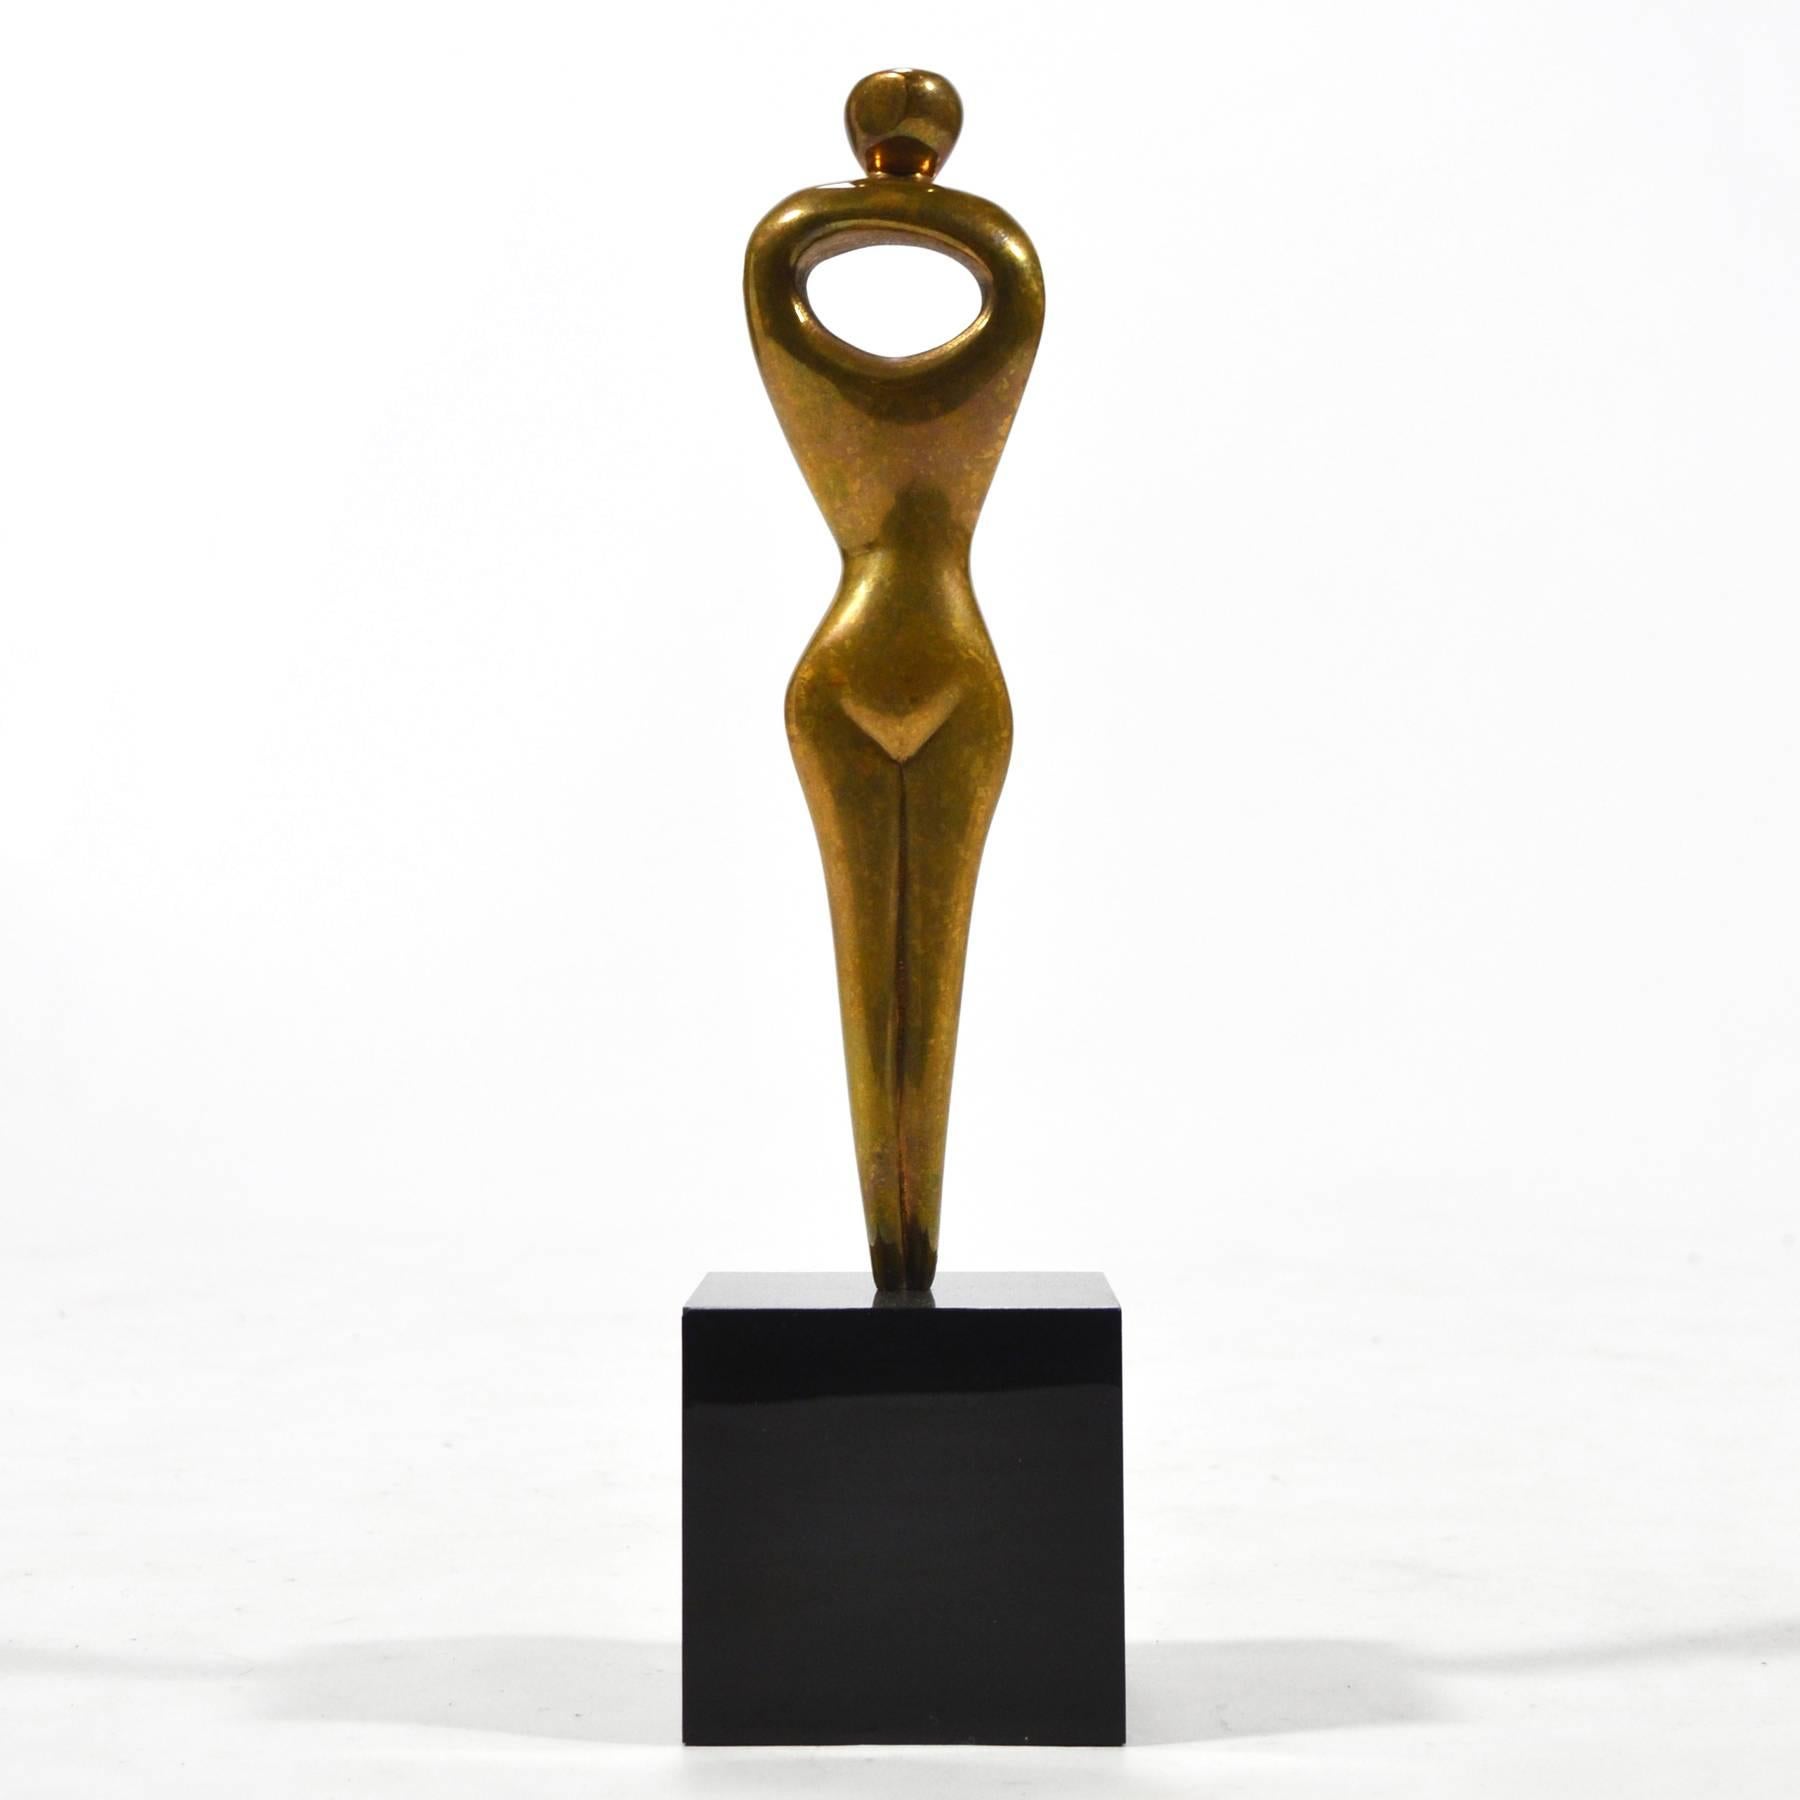 A sublime abstraction of a female figure, this bronze sculpture by Alfredo Burlini possesses an elegant serenity. With an economy of line, the fluid forms express the bare essentials to convey a standing figure. The pierced torso is an especially